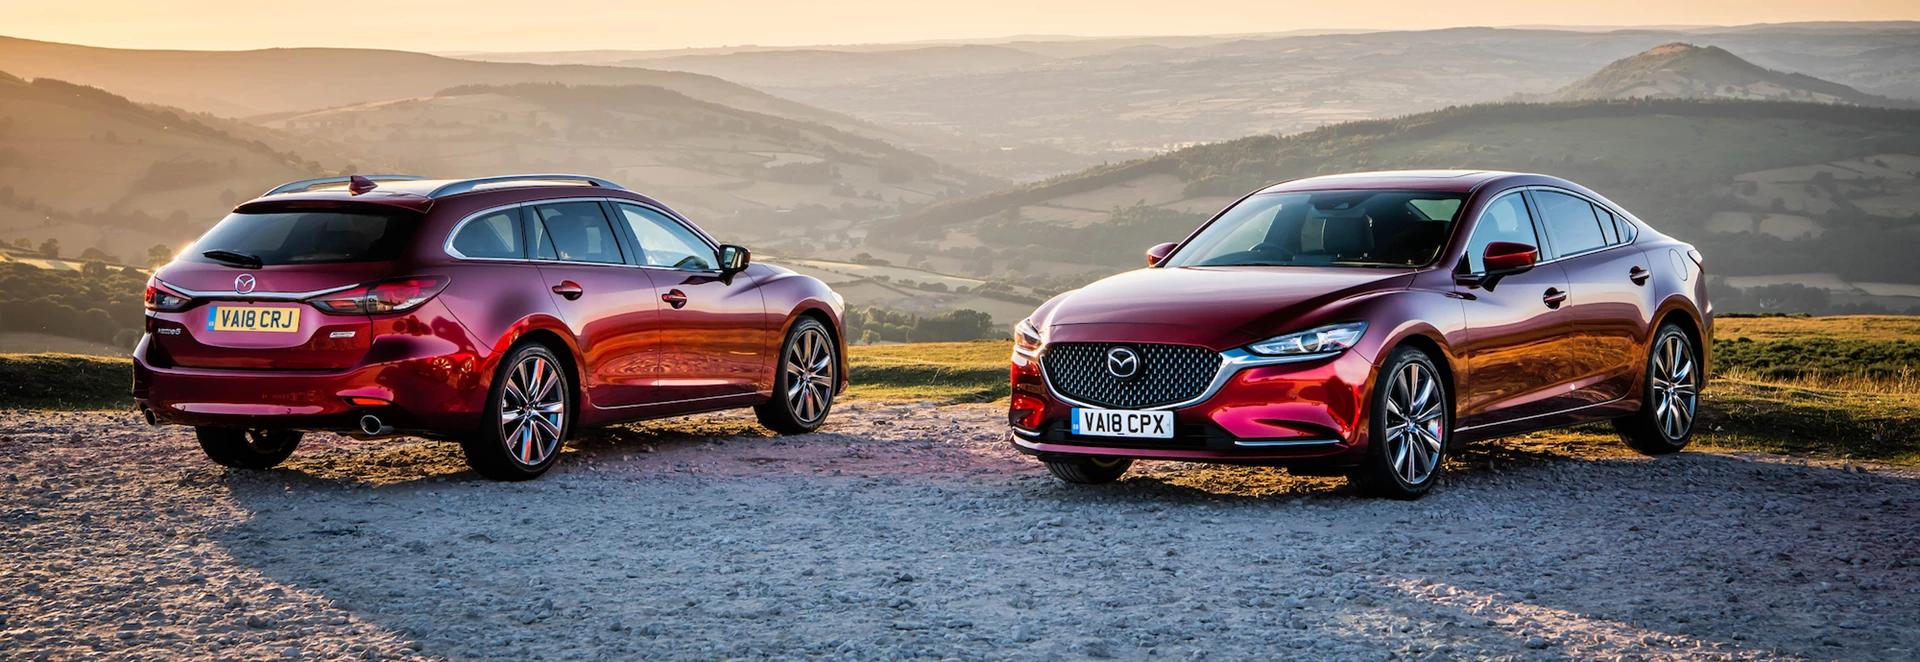 Pricing and spec announced for Mazda 6 range